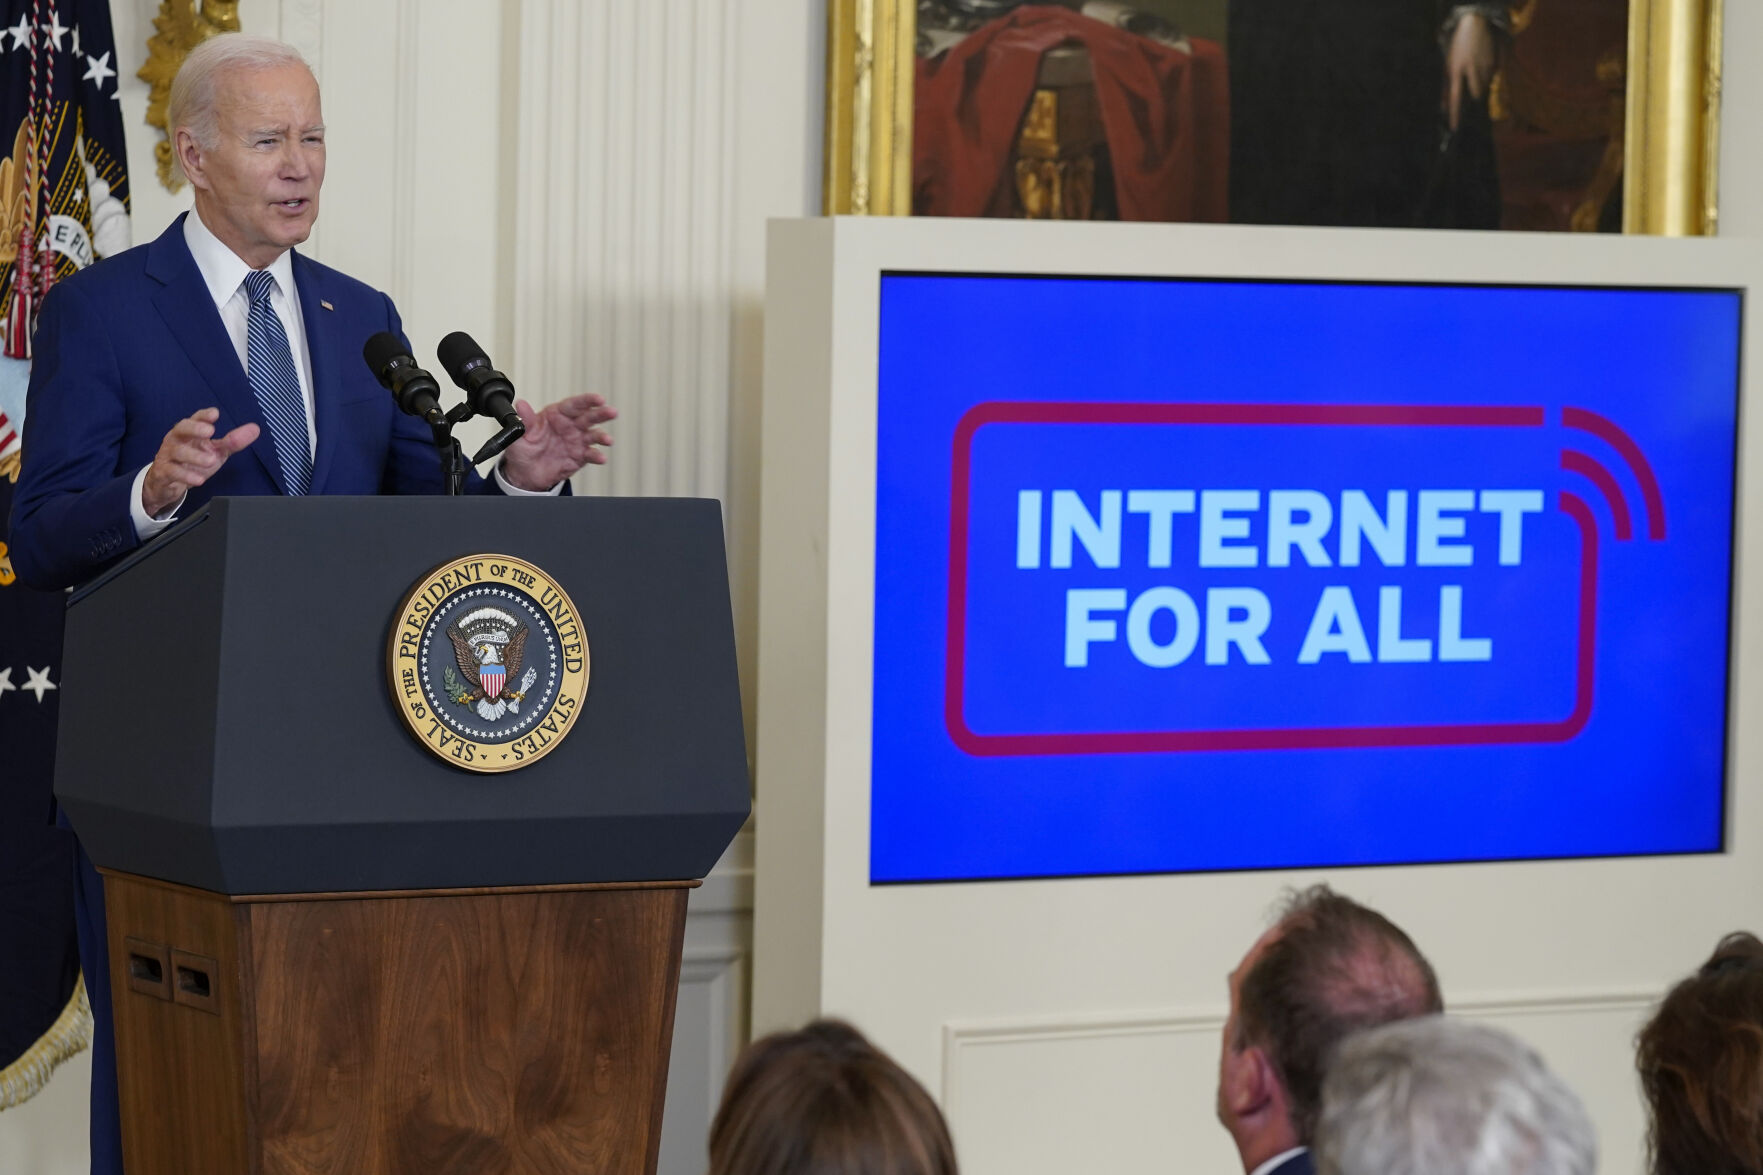 <p>FILE - President Joe Biden speaks during an event about high-speed internet infrastructure in the East Room of the White House, Monday, June 26, 2023, in Washington. The Biden administration on Monday, Aug. 21, continued its push toward internet-for-all by 2030, announcing about $667 million in new grants and loans to build more broadband infrastructure in the rural U.S. (AP Photo/Evan Vucci)</p>   PHOTO CREDIT: Evan Vucci 